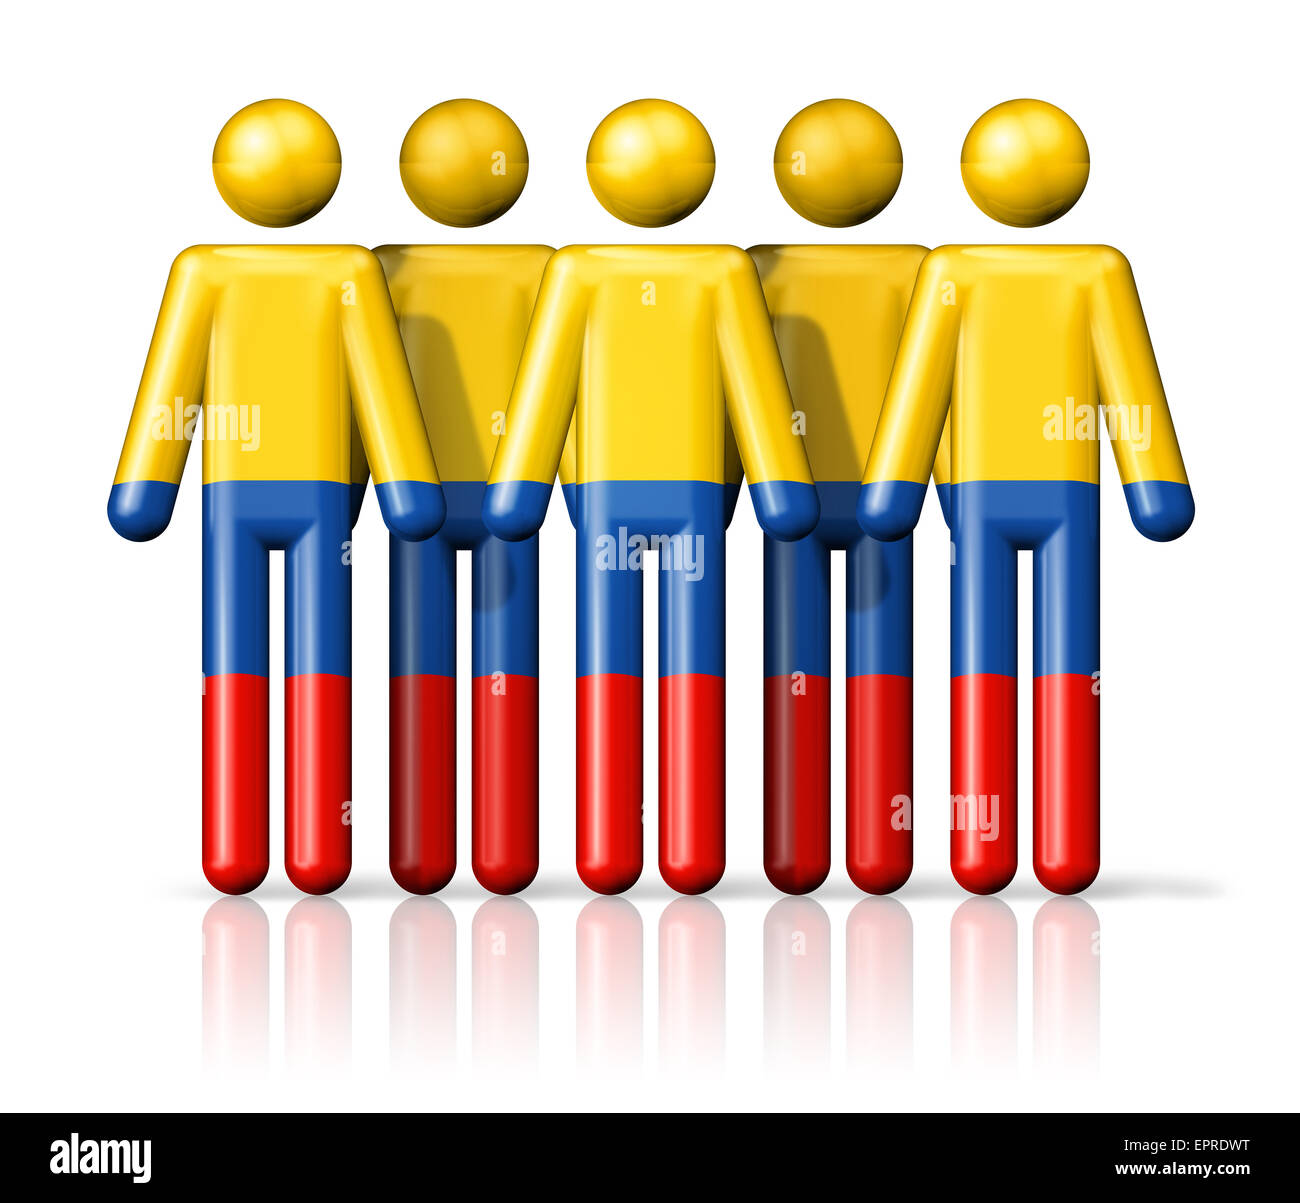 Flag of Colombia on stick figure - national and social community symbol 3D icon Stock Photo